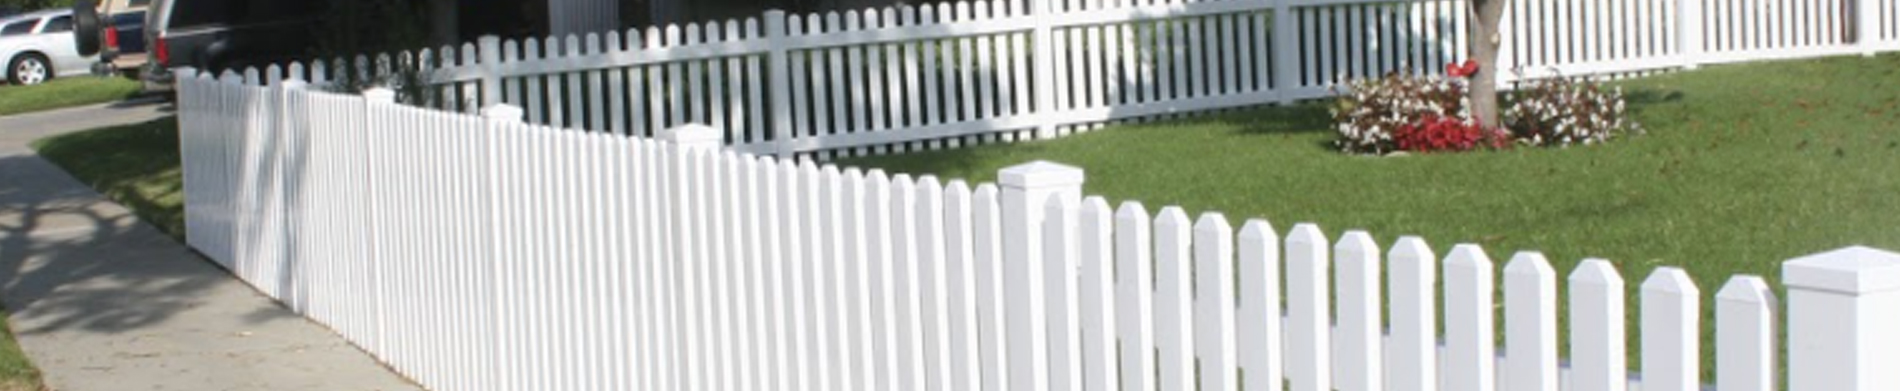 Having a vinyl fence increases the resale value of your property – Invest in custom vinyl fencing